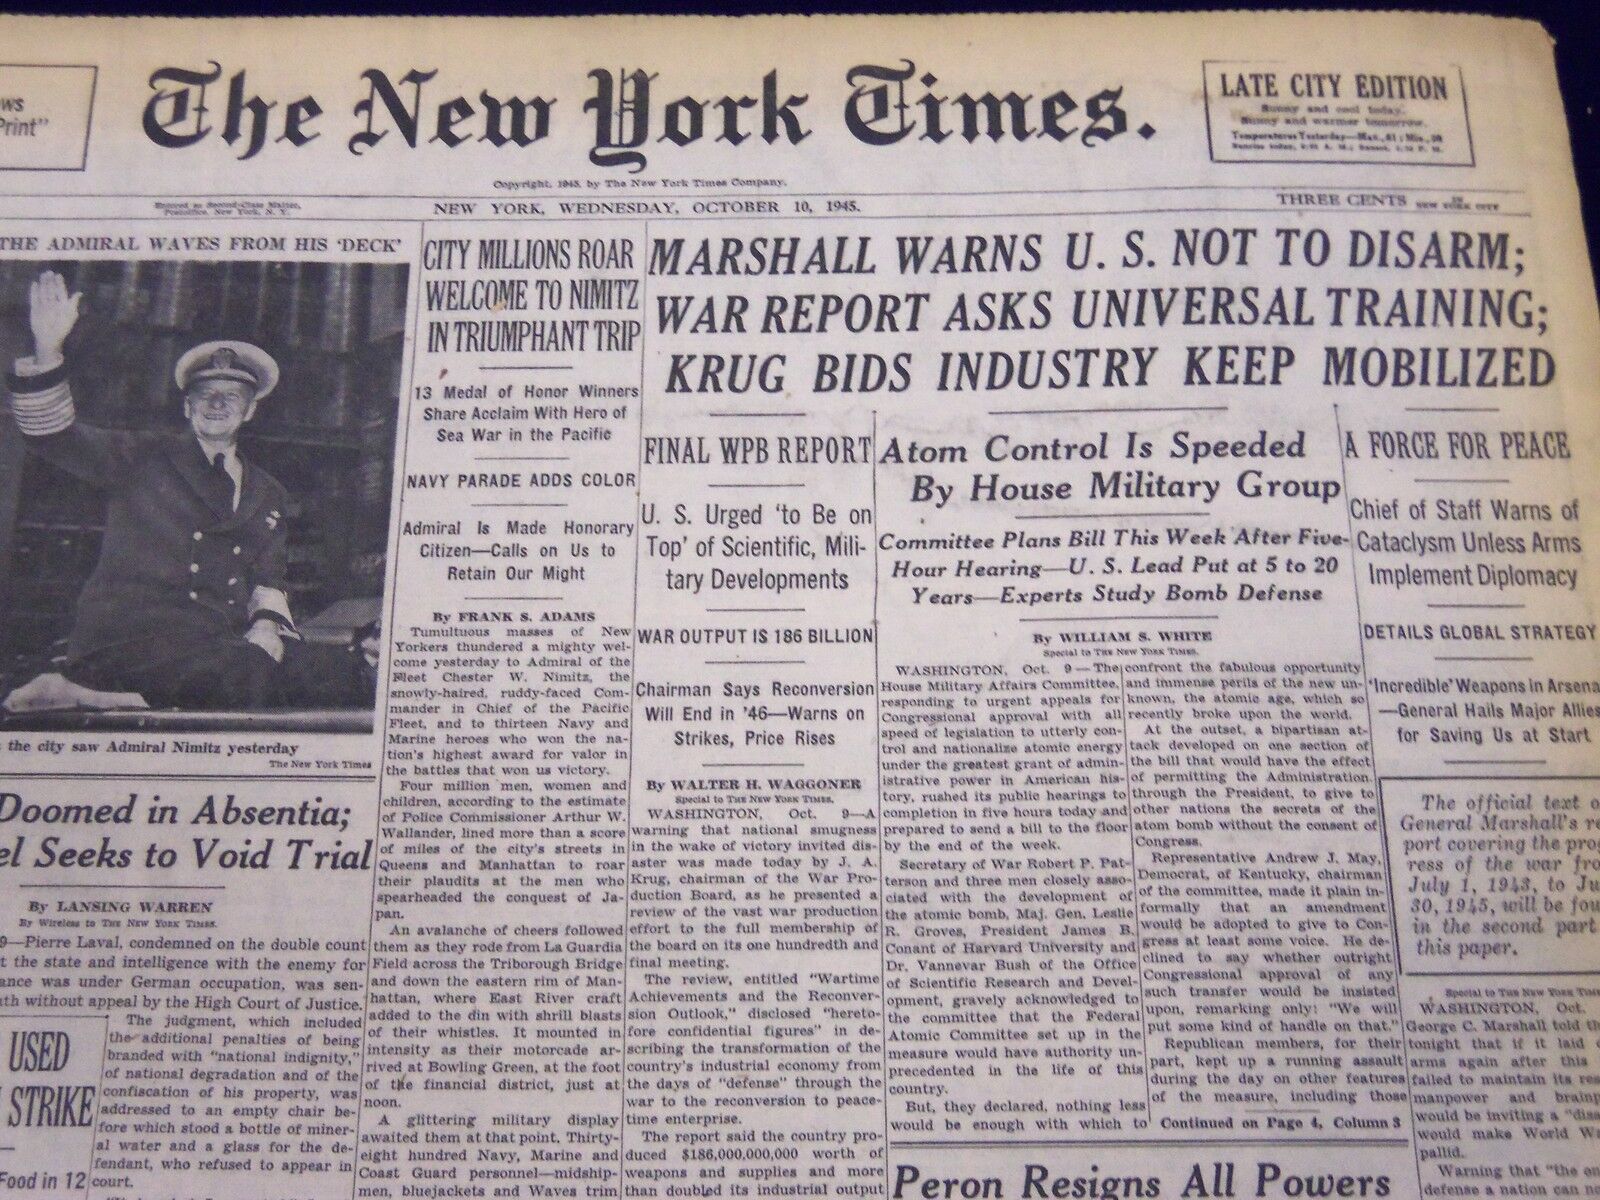 1945 OCT 10 NEW YORK TIMES - CITY MILLIONS ROAR WELCOME TO NIMITZ - NT 275